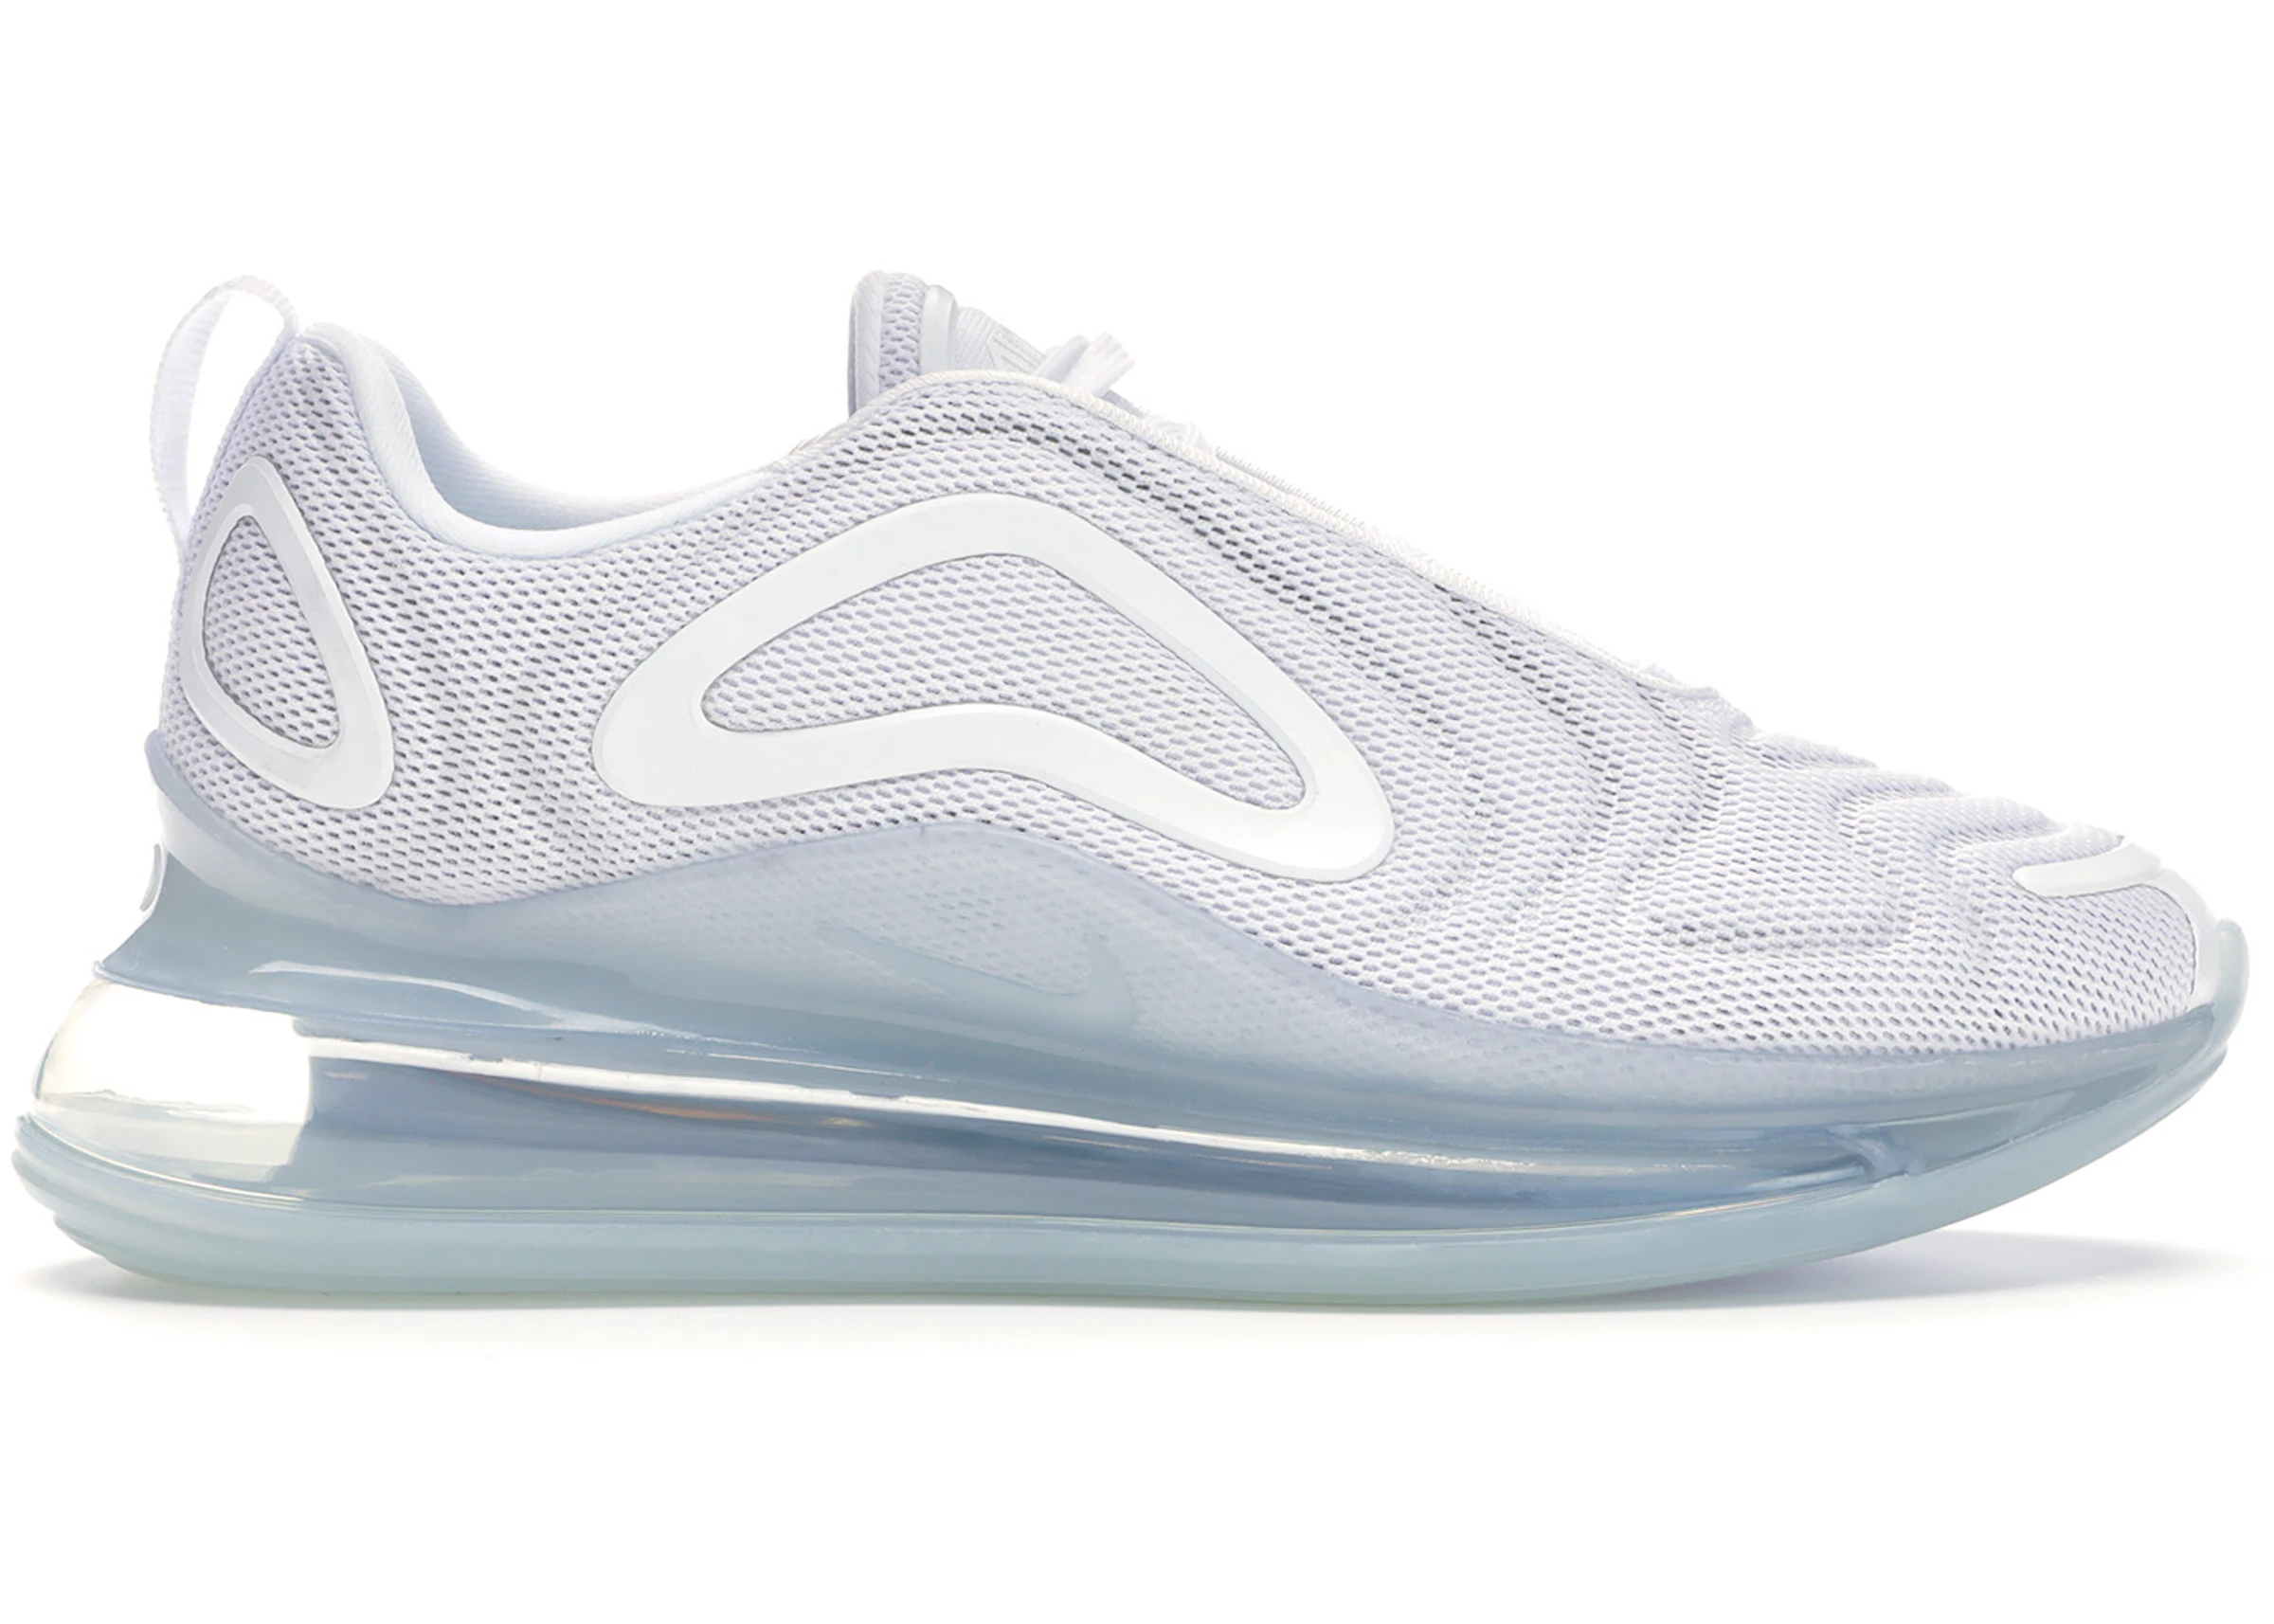 Buy Nike Air Max 720 Shoes & New Sneakers - Stockx